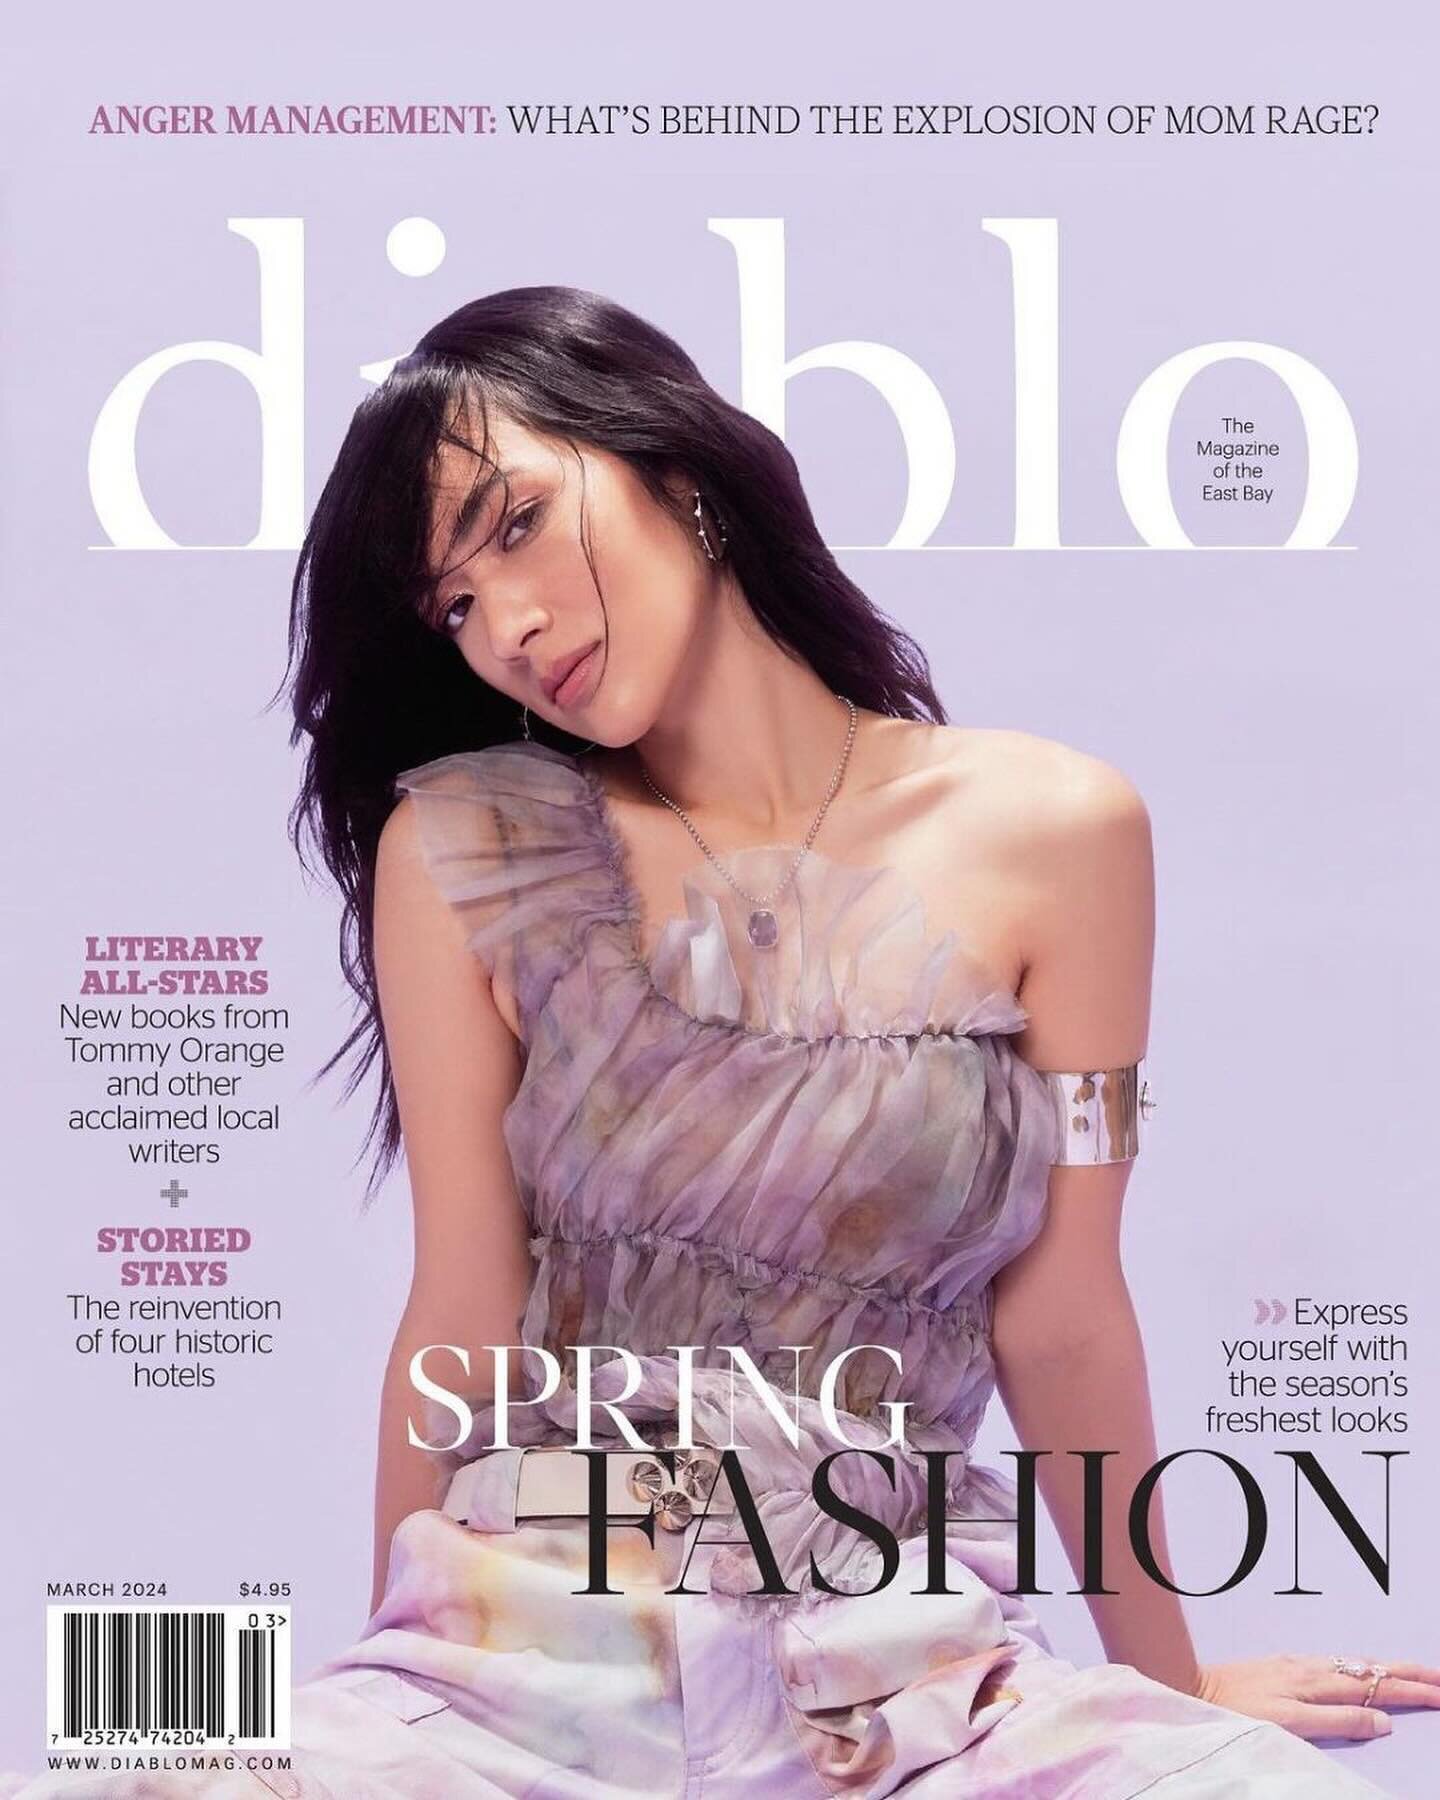 Diablo Magazine&rsquo;s Spring Fashion Issue, featuring wardrobe styling by LuLu stylist Nichole Kreglow (@nichole.kreglow), is out, and we are *obsessed* with every one of these looks. 🌼

Creative Director: David Bergeron
Photography: Katie Lovecra